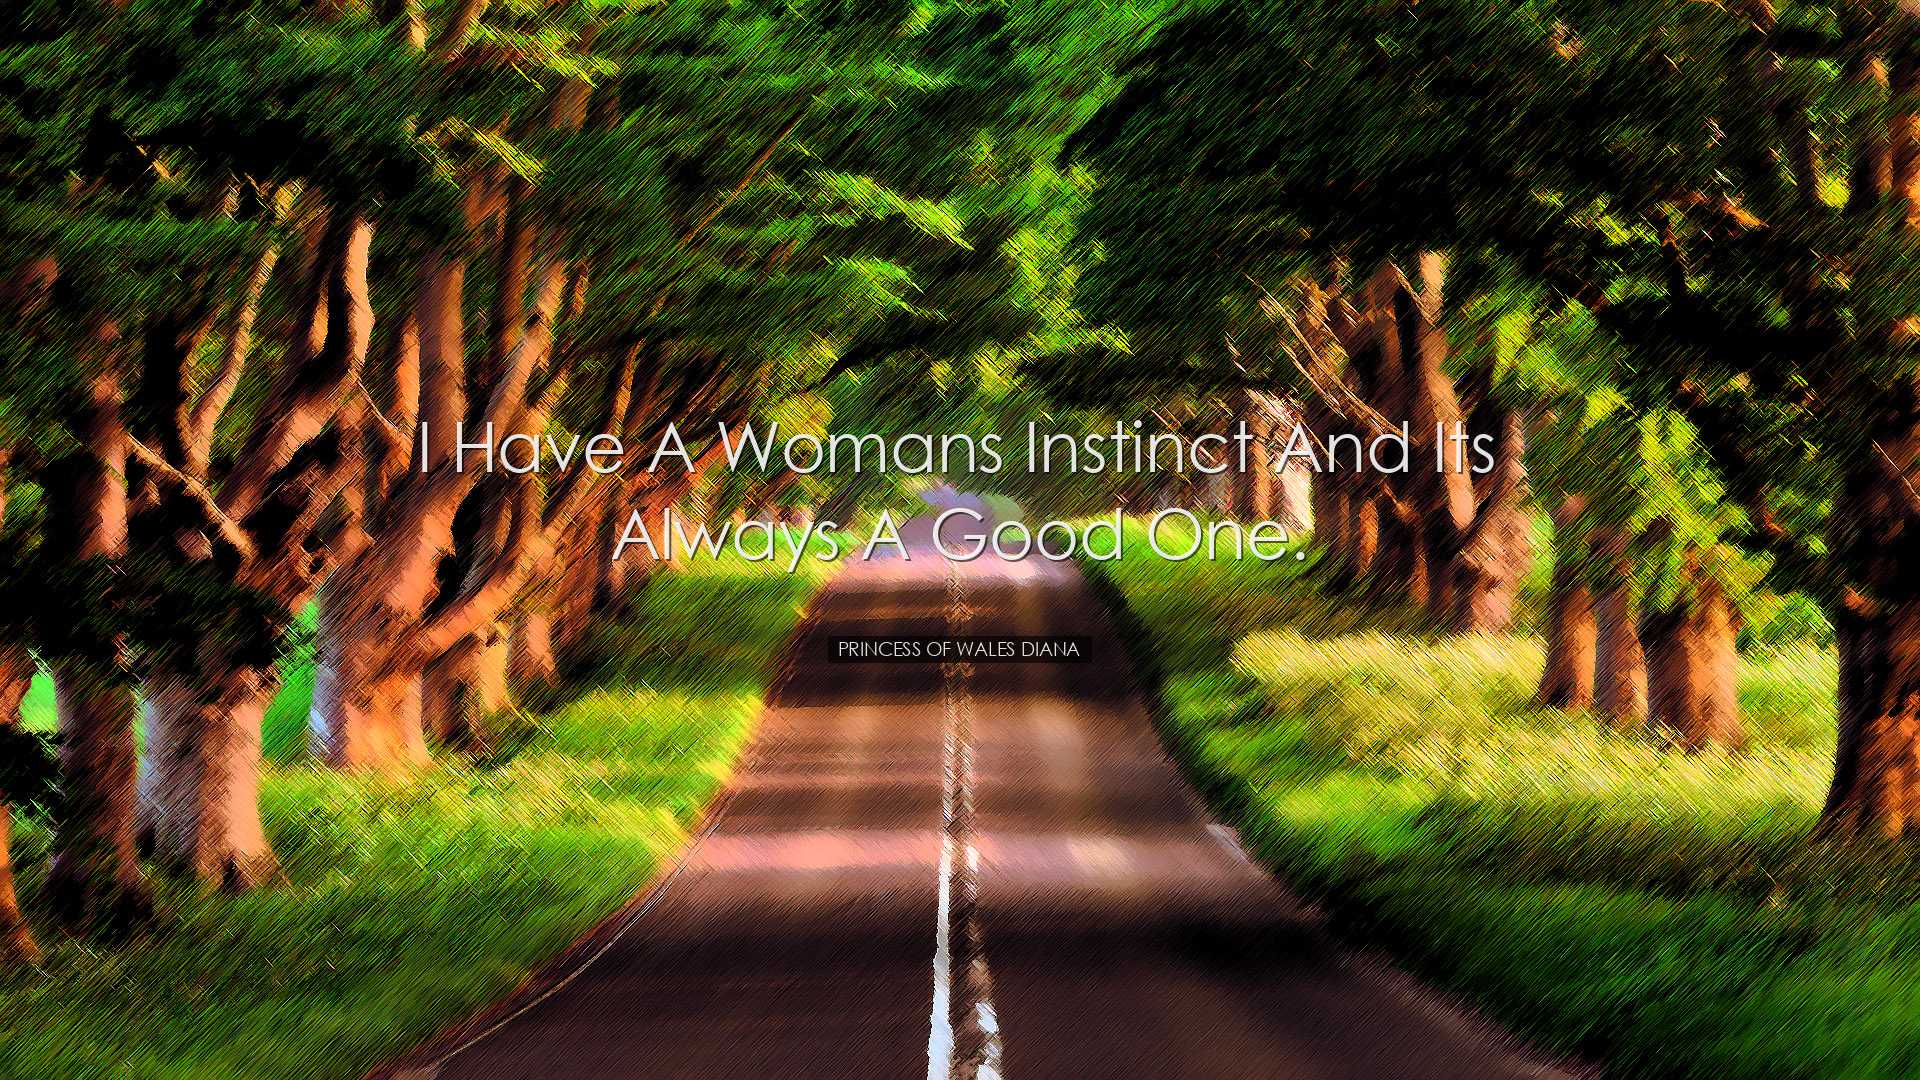 I have a womans instinct and its always a good one. - Princess of